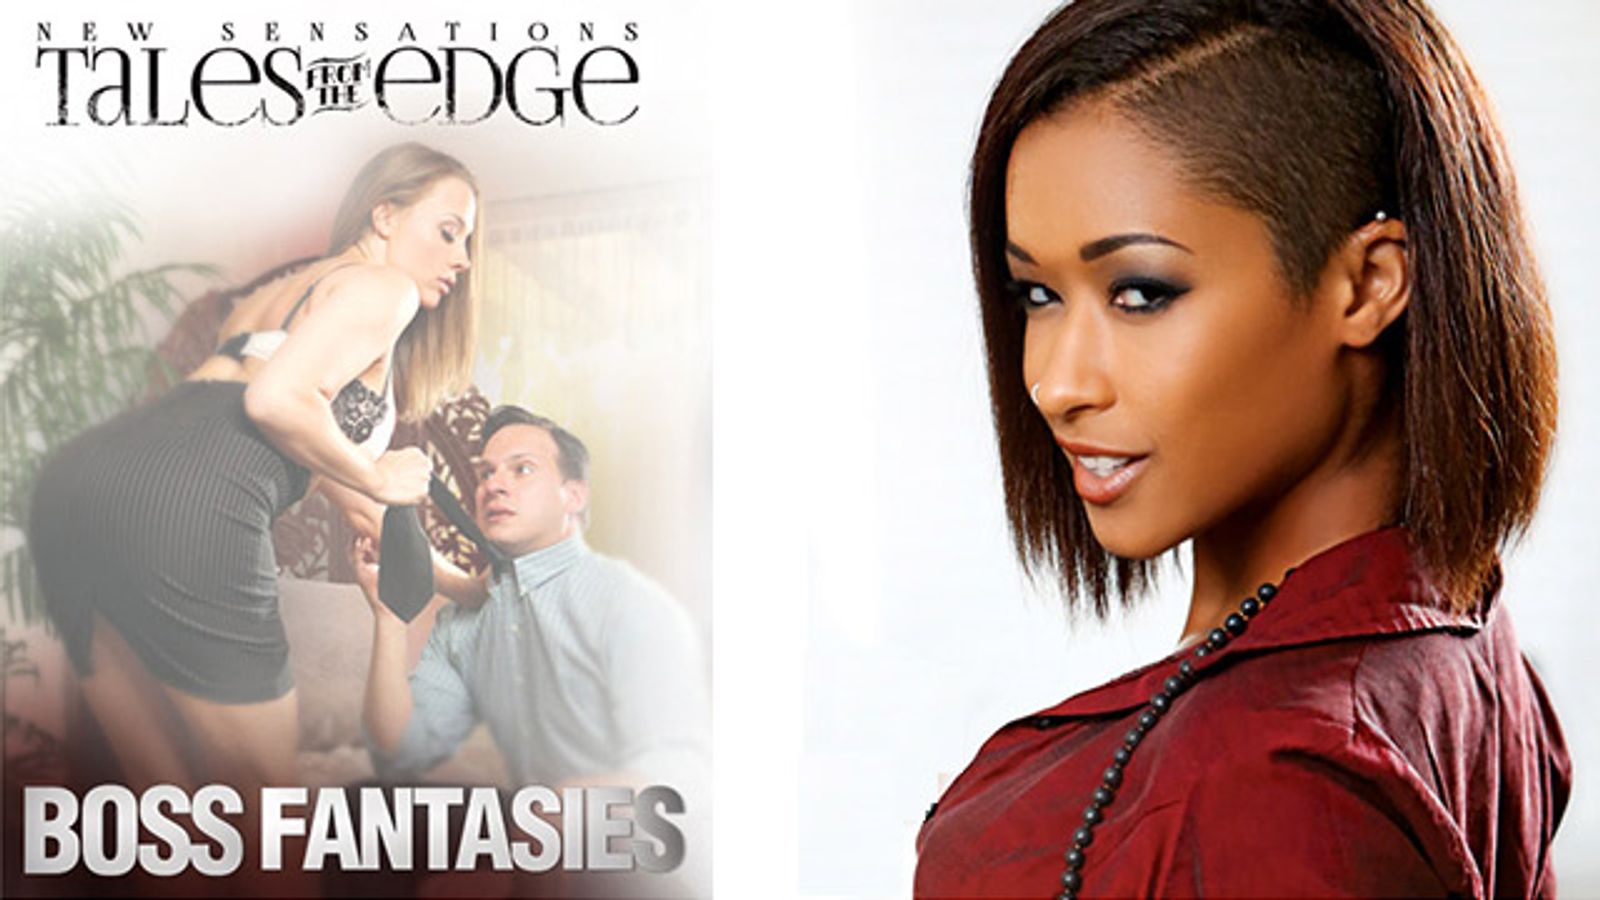 New Sensations Releases 'Tales From The Edge: Boss Fantasies'